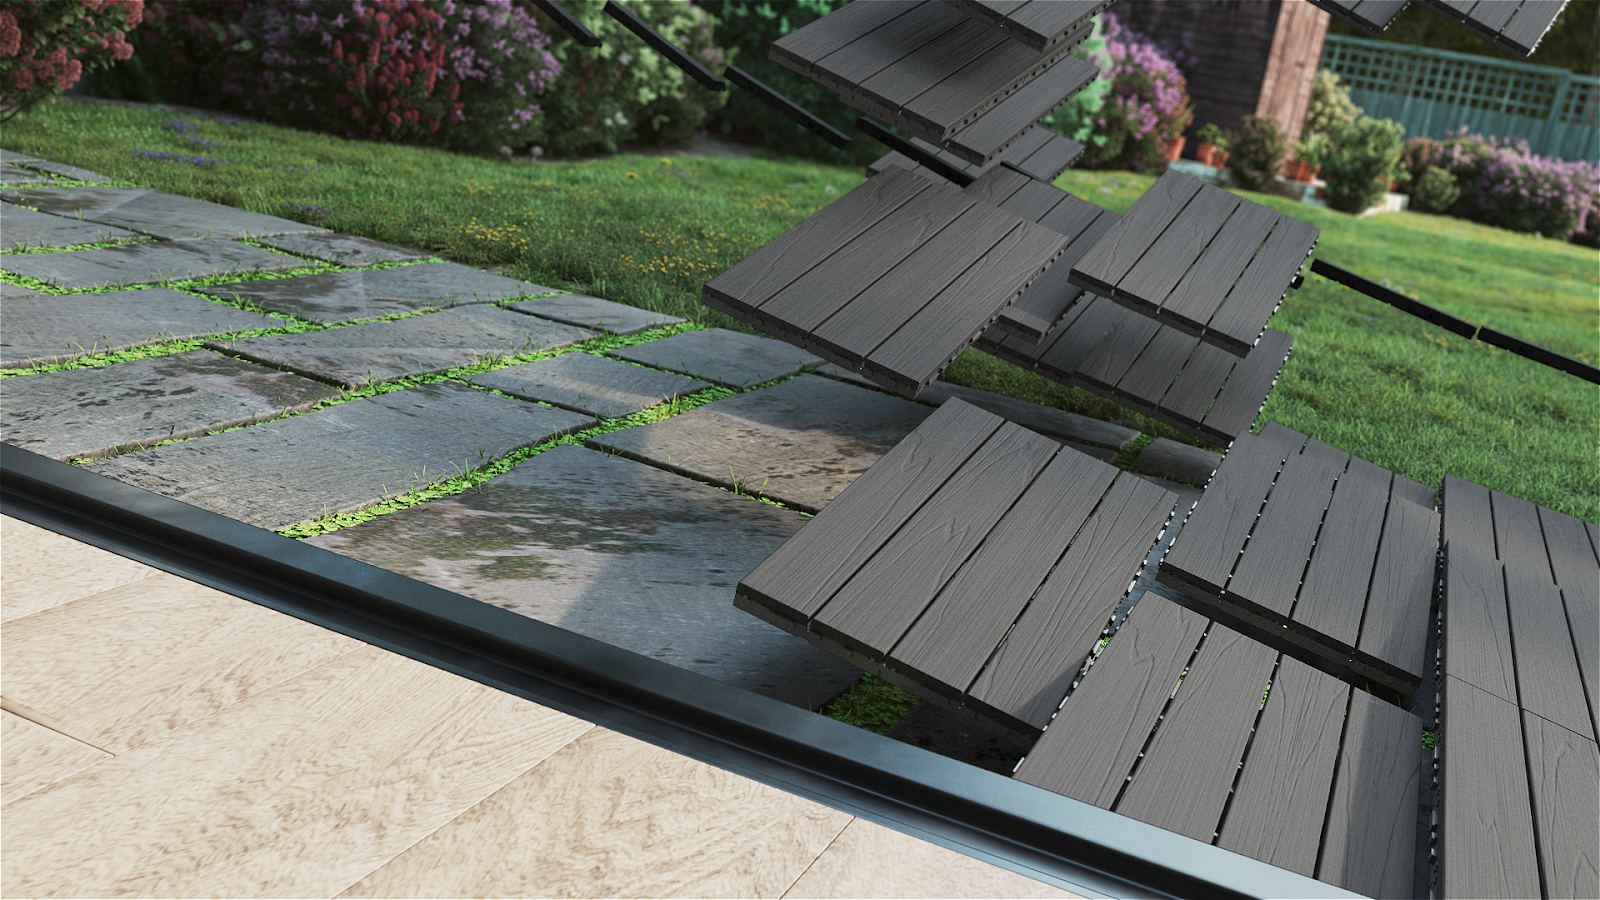 The 605 mm by 305 mm decking tiles have an interlocking design.